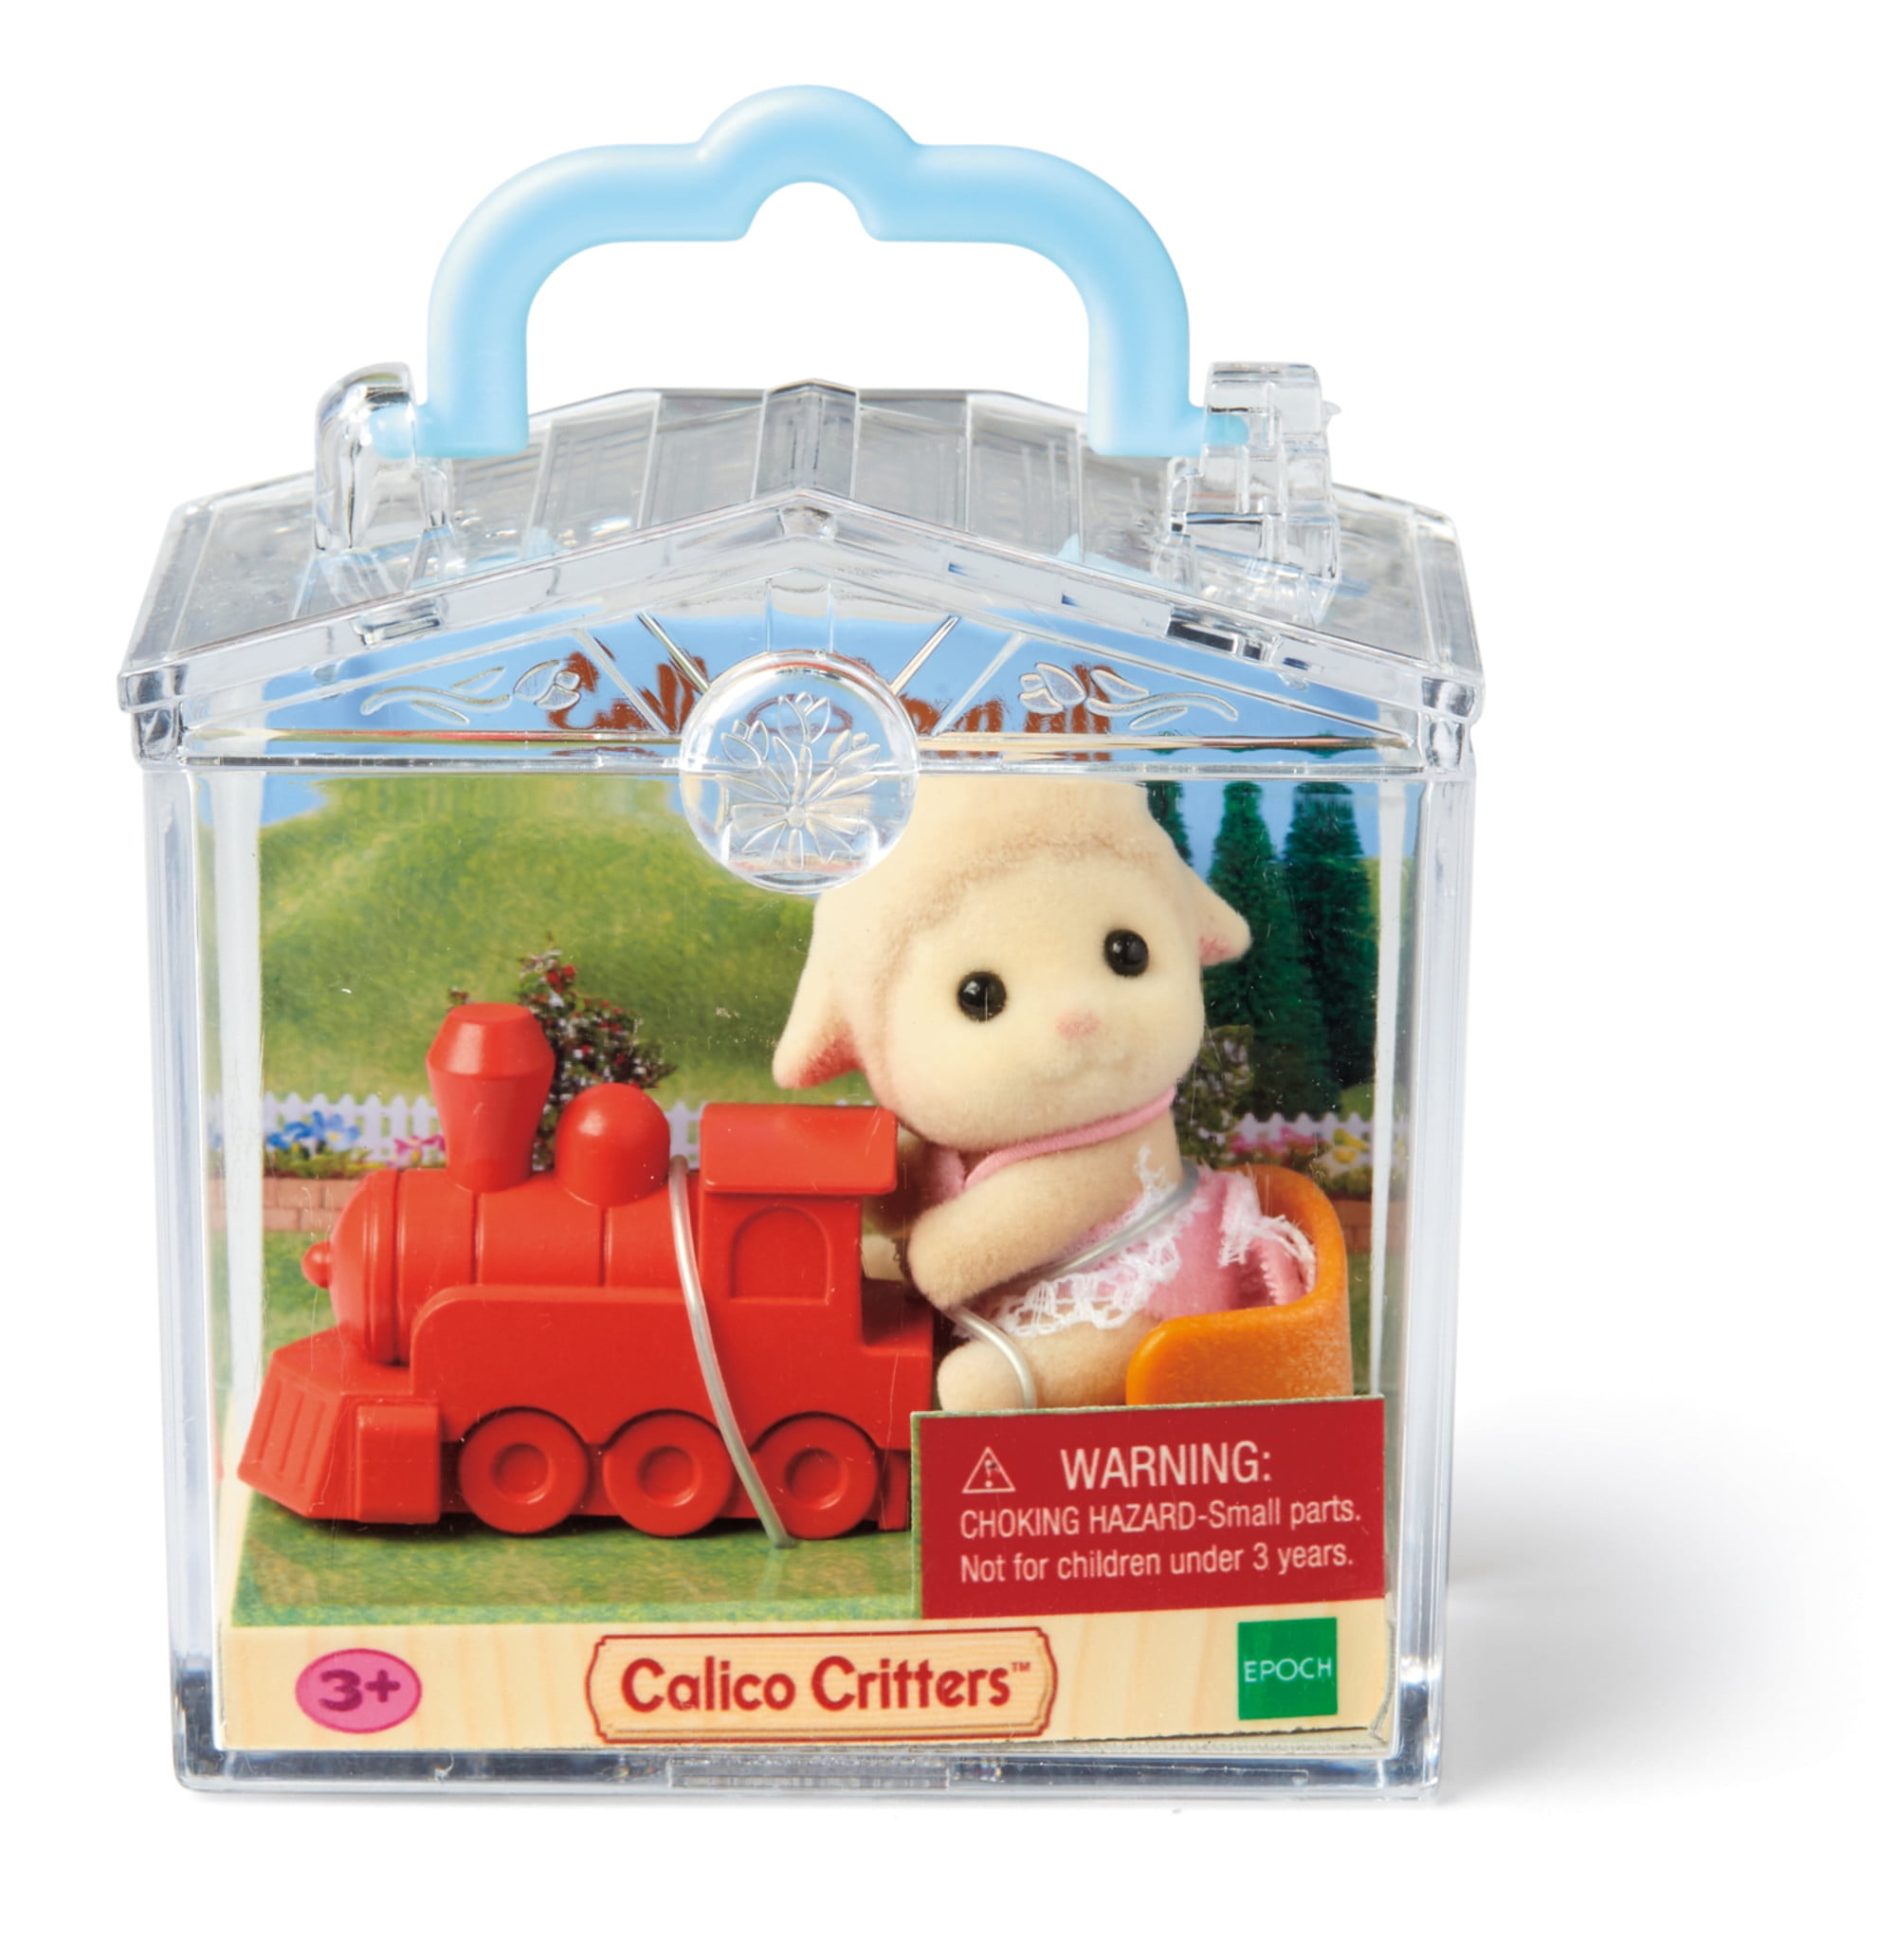 Details about   Calico Critters Baby Lamb Figure with Red Train in Clear Display Case BRAND NEW